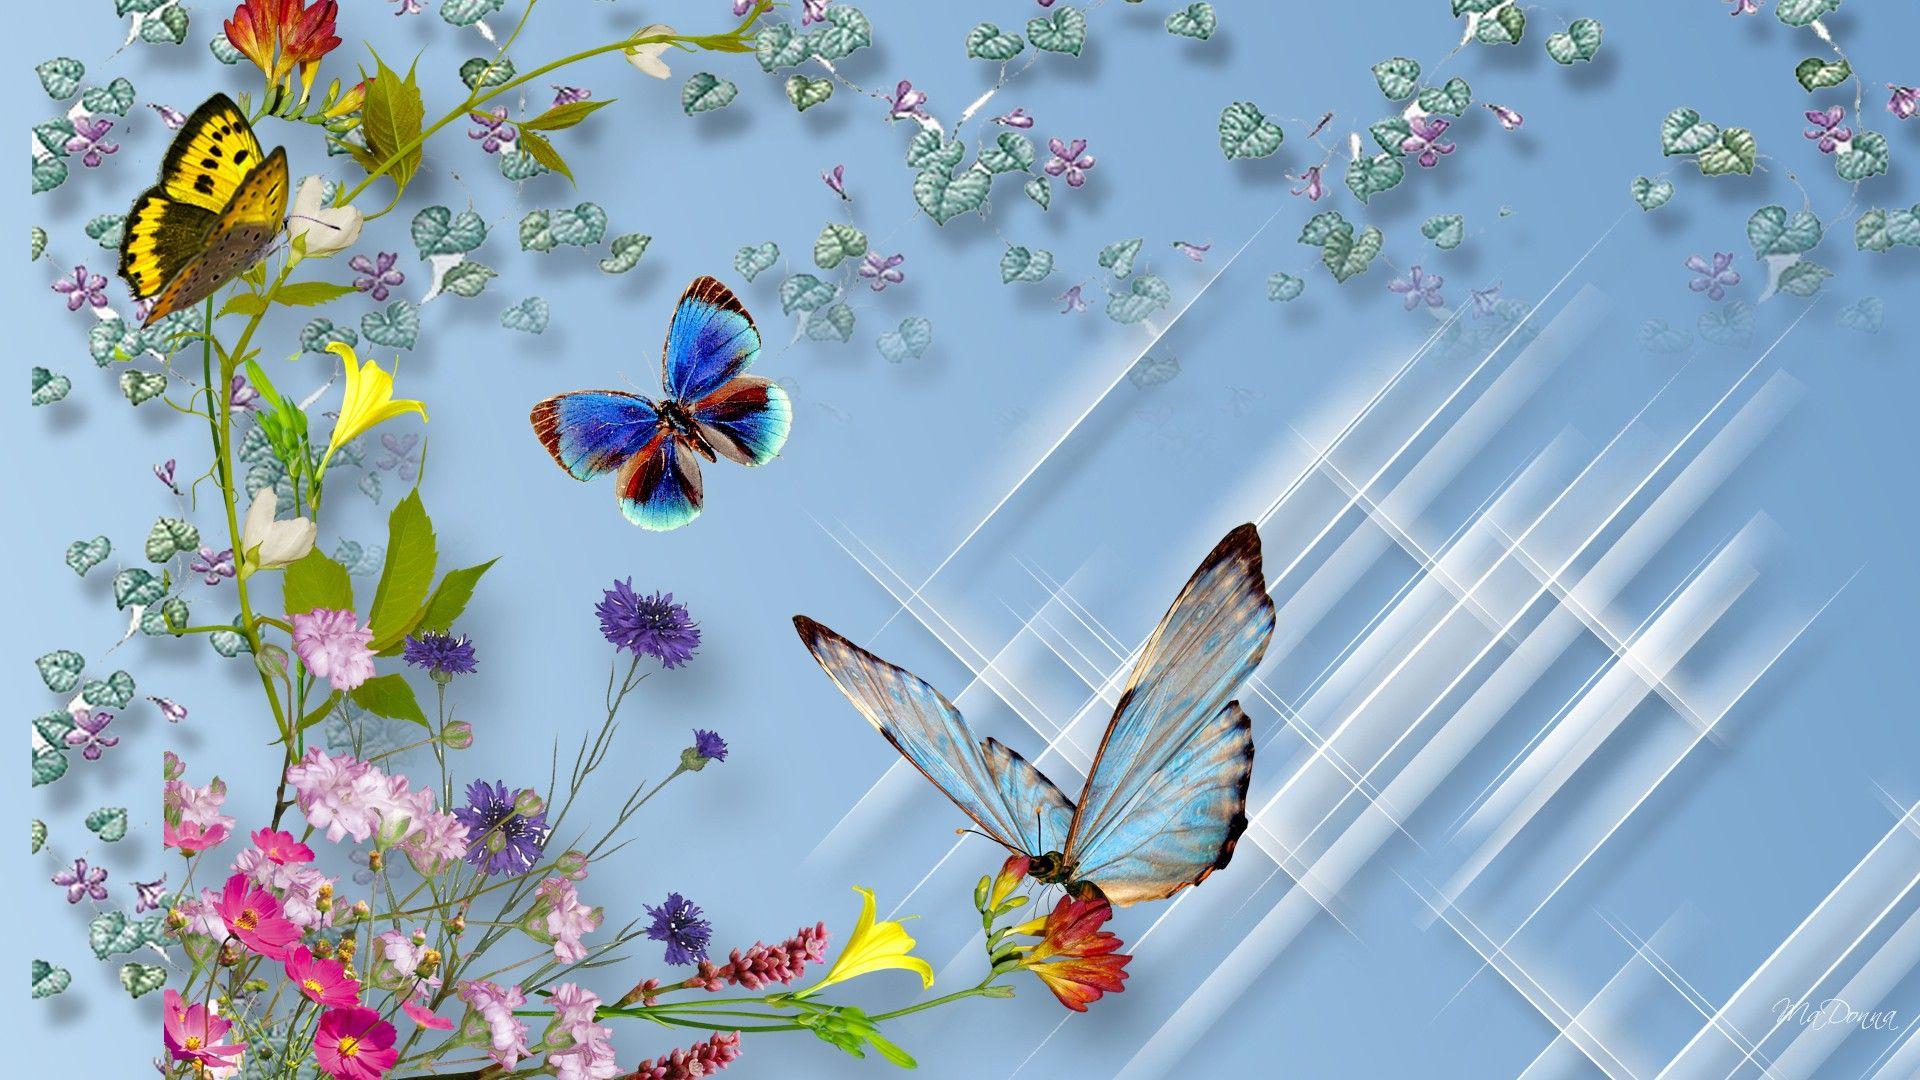 Flowers With Butterfly Wallpapers HD - Wallpaper Cave